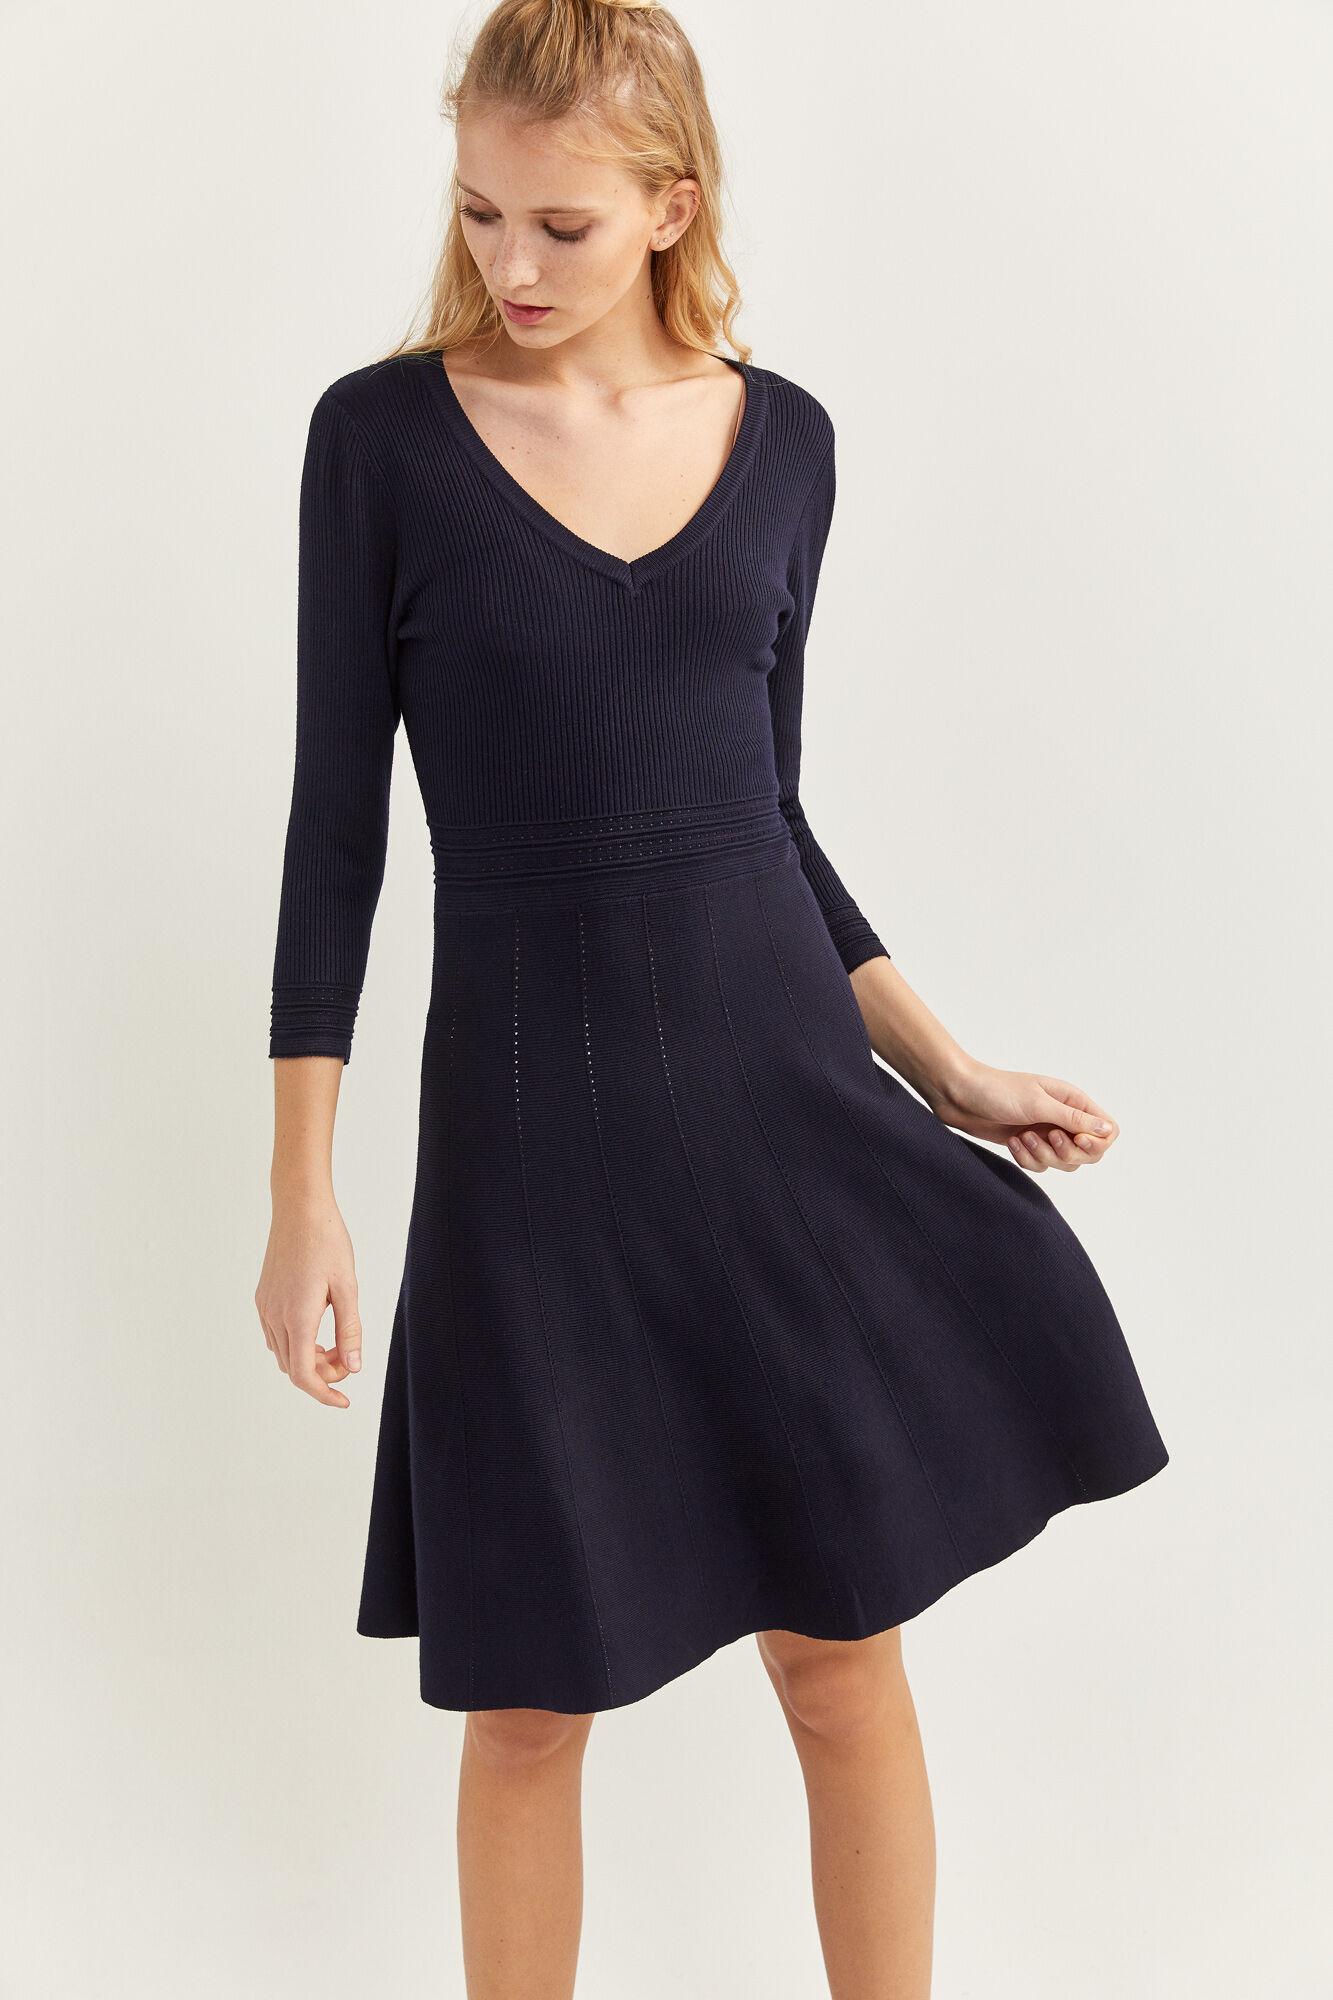 jersey knit dress with sleeves